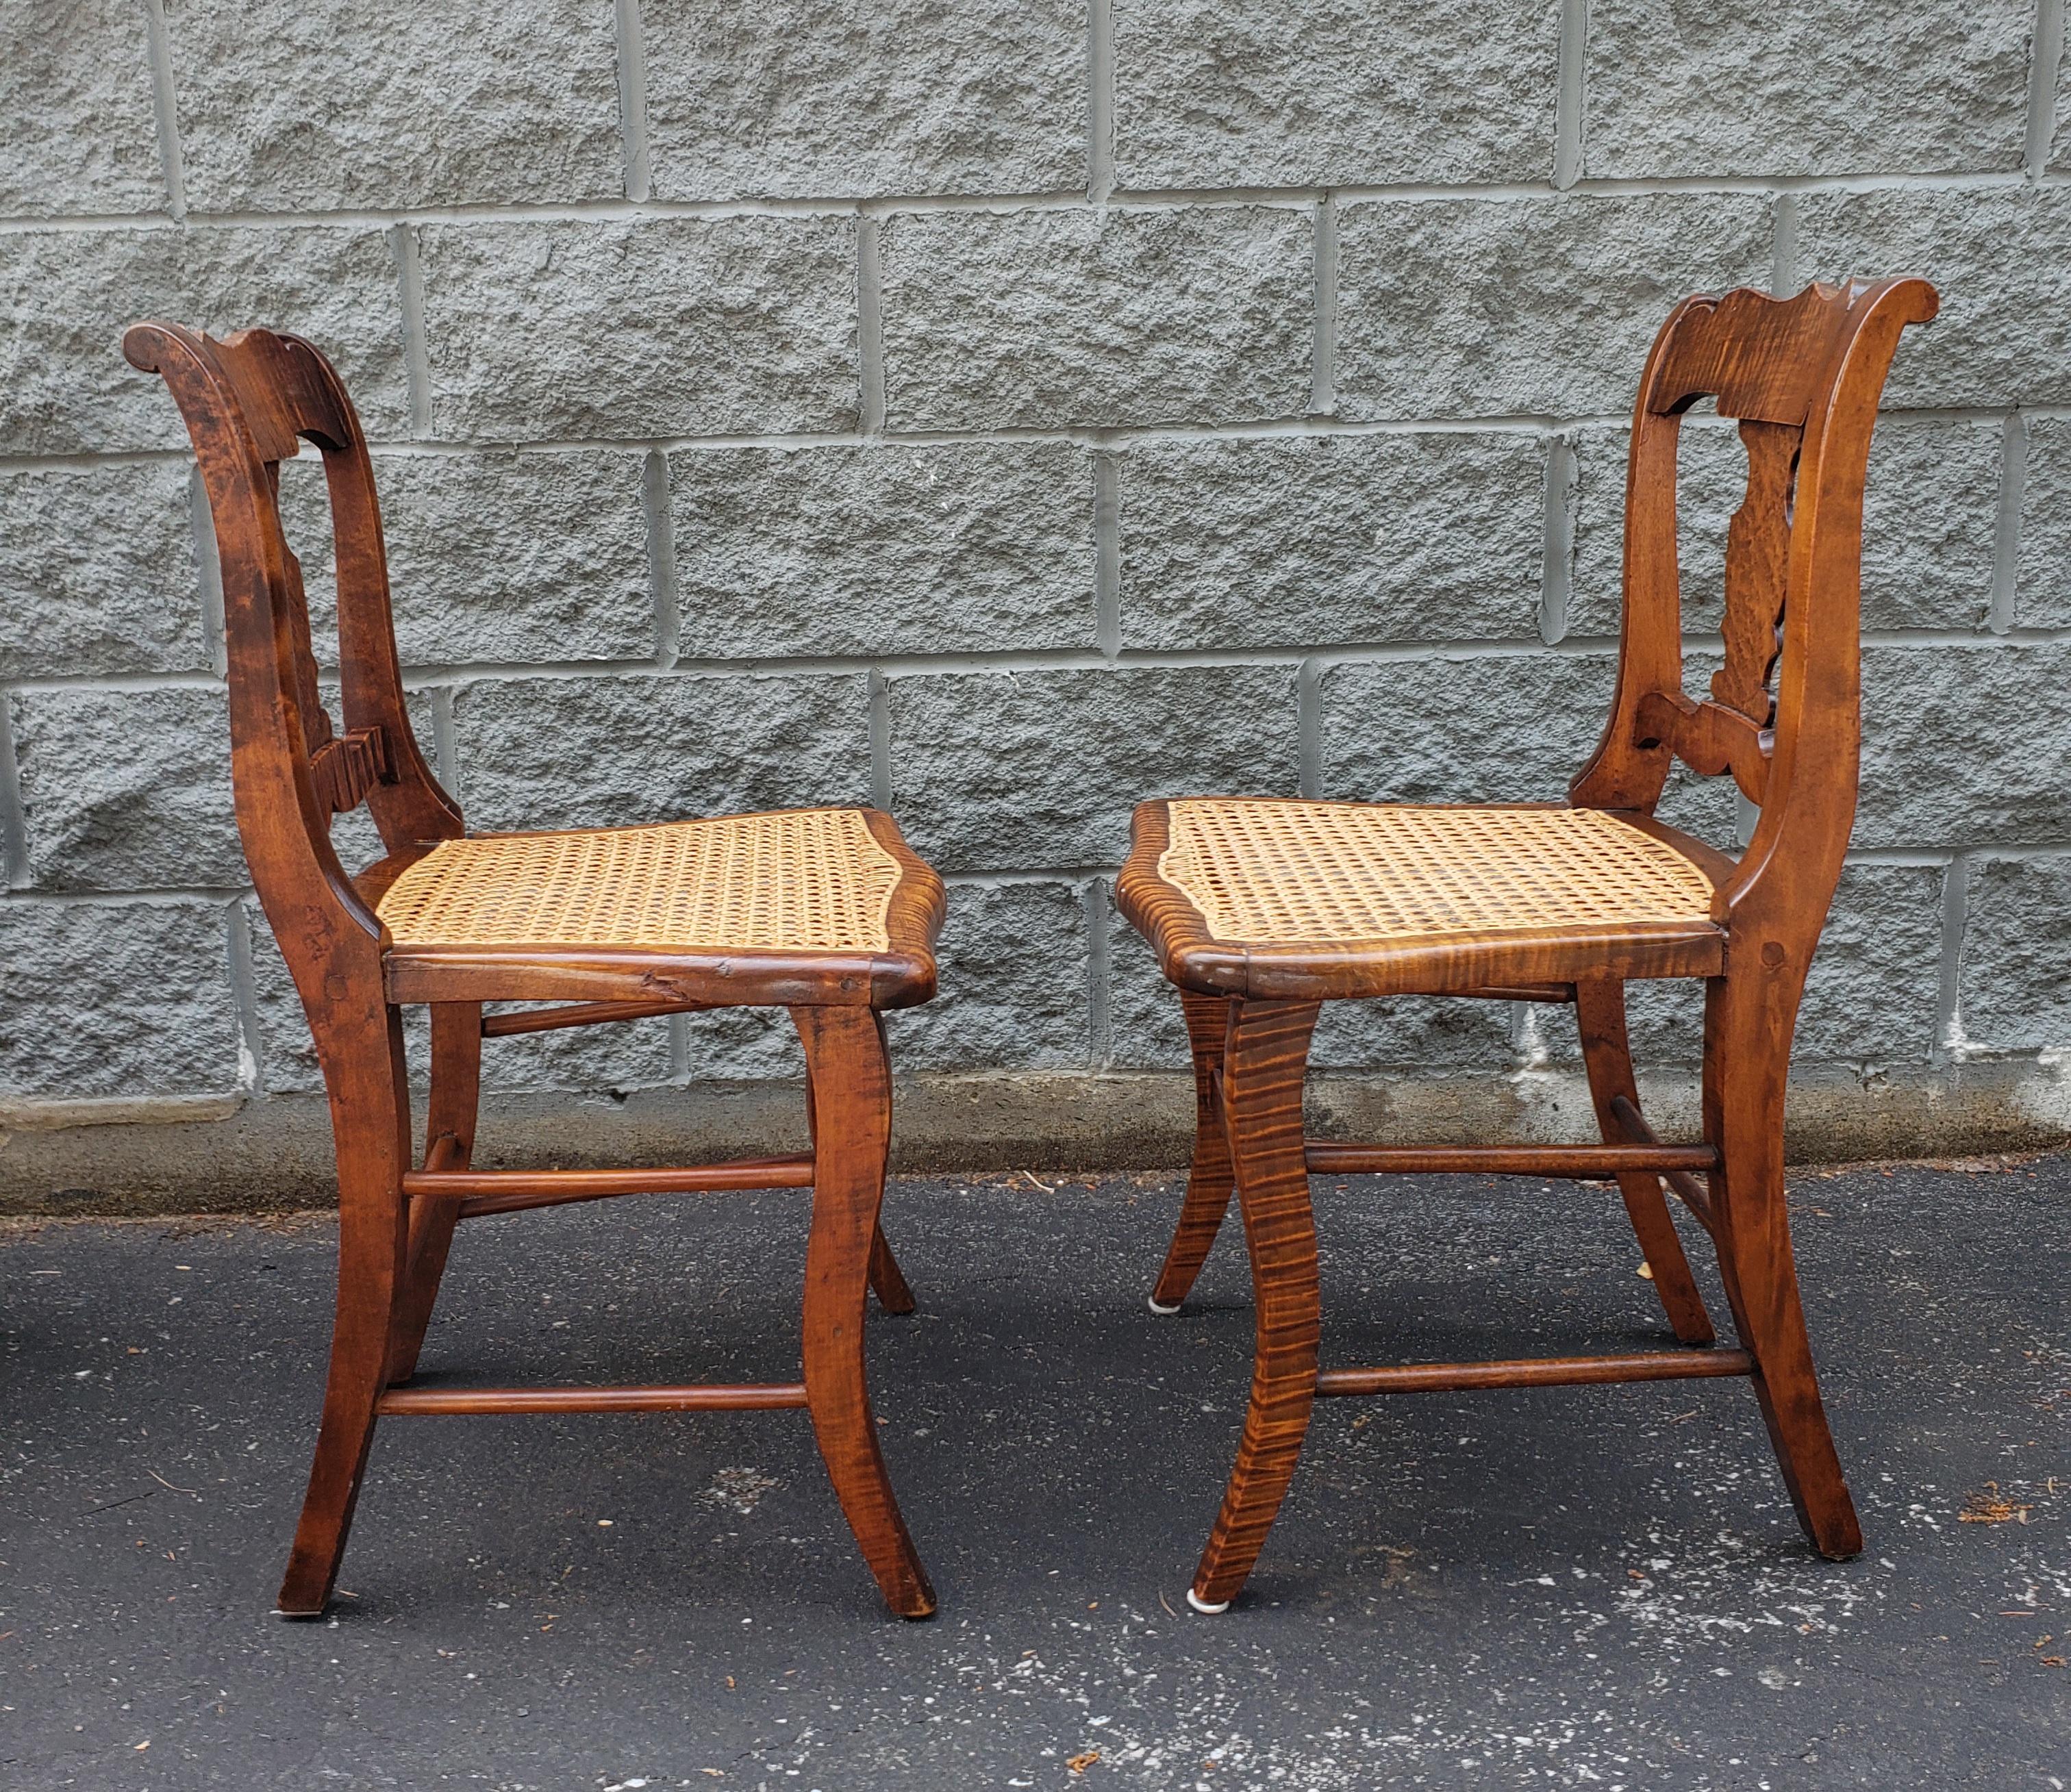 Early American Tiger Wood and Cane Seat Chairs, Set of 4 For Sale 3